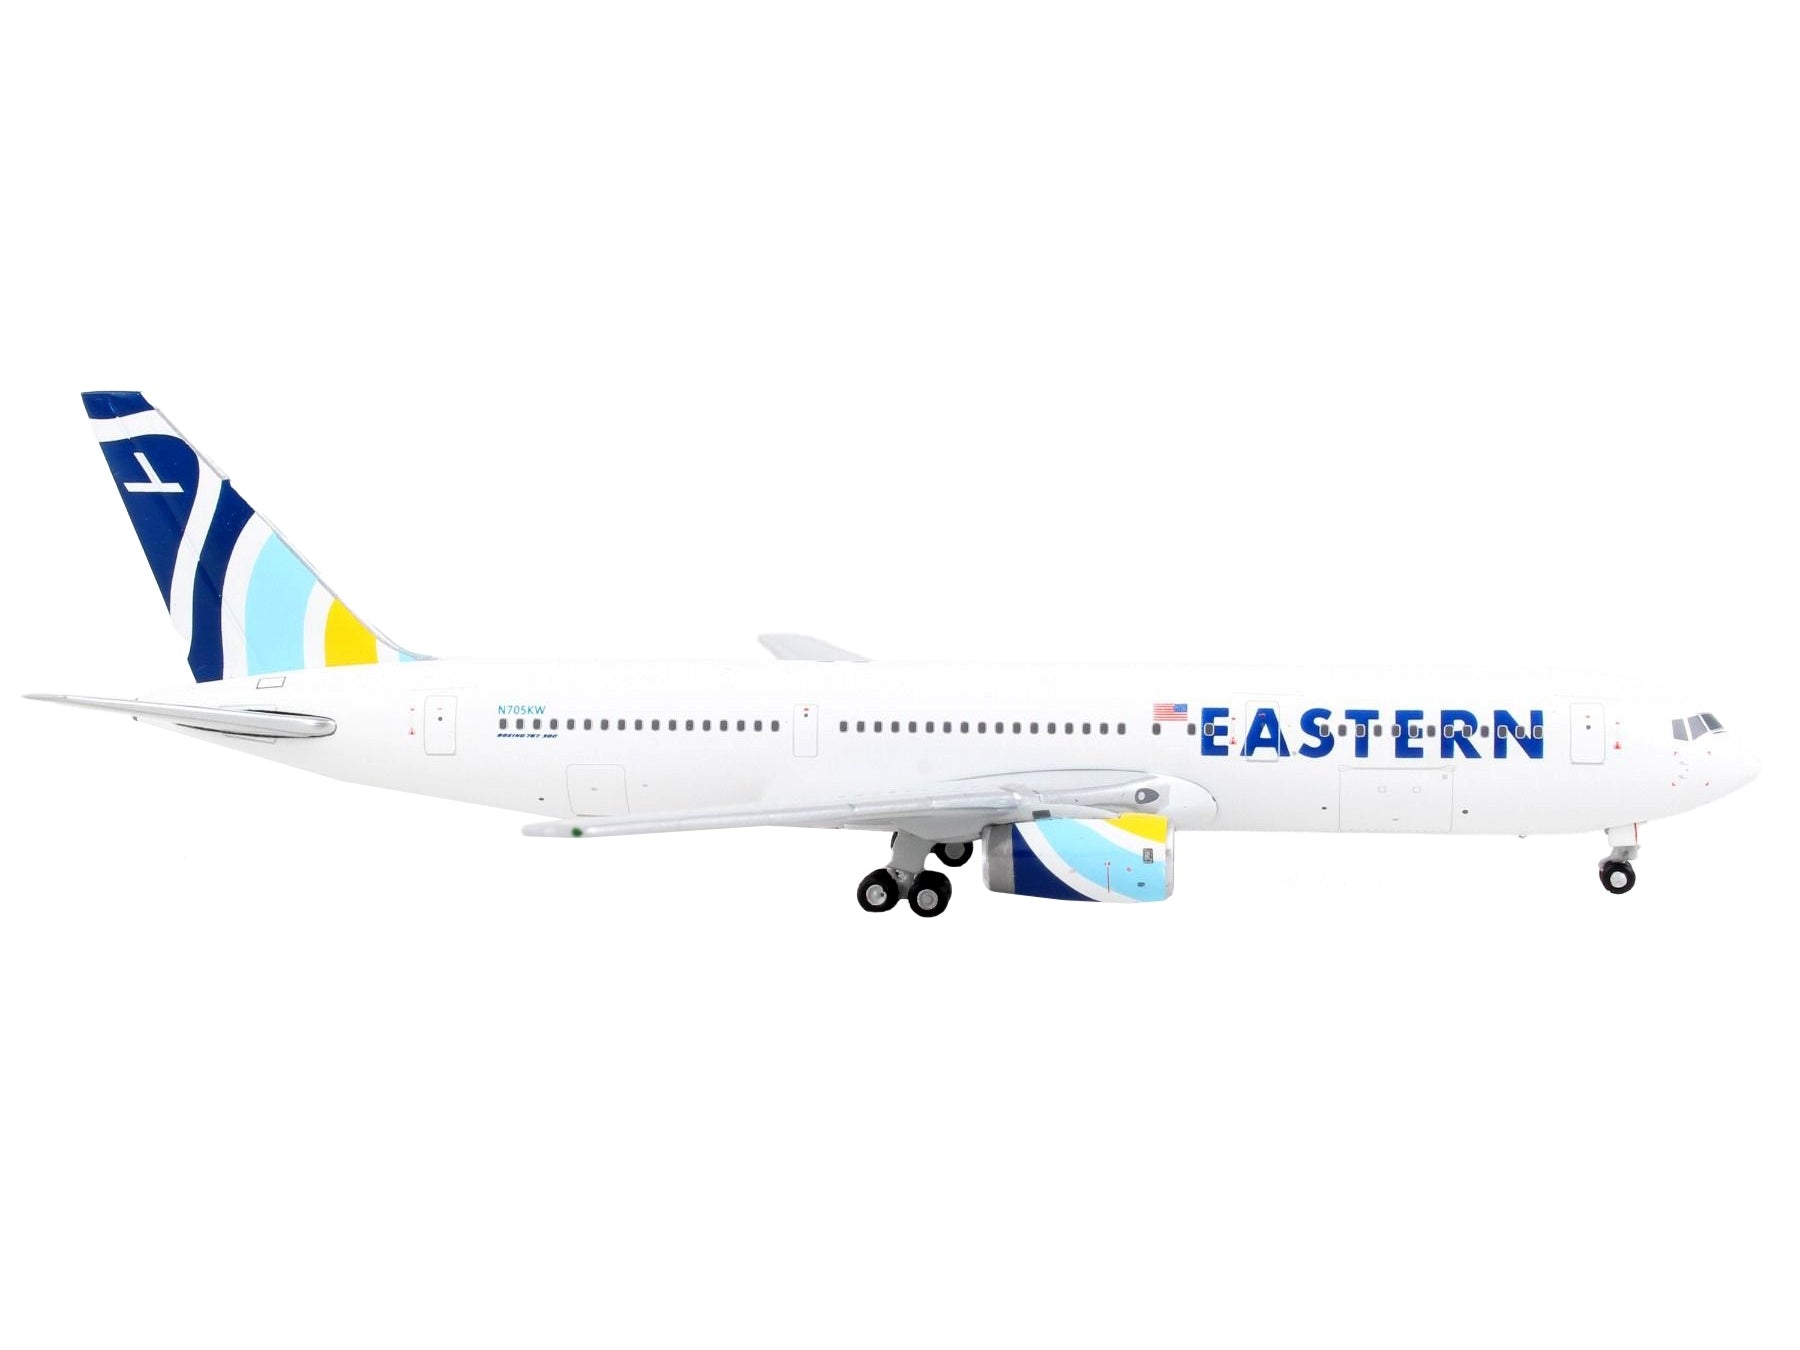 Boeing 767-300ER Commercial Aircraft "Eastern Airlines" White with Striped Tail 1/400 Diecast Model Airplane by GeminiJets